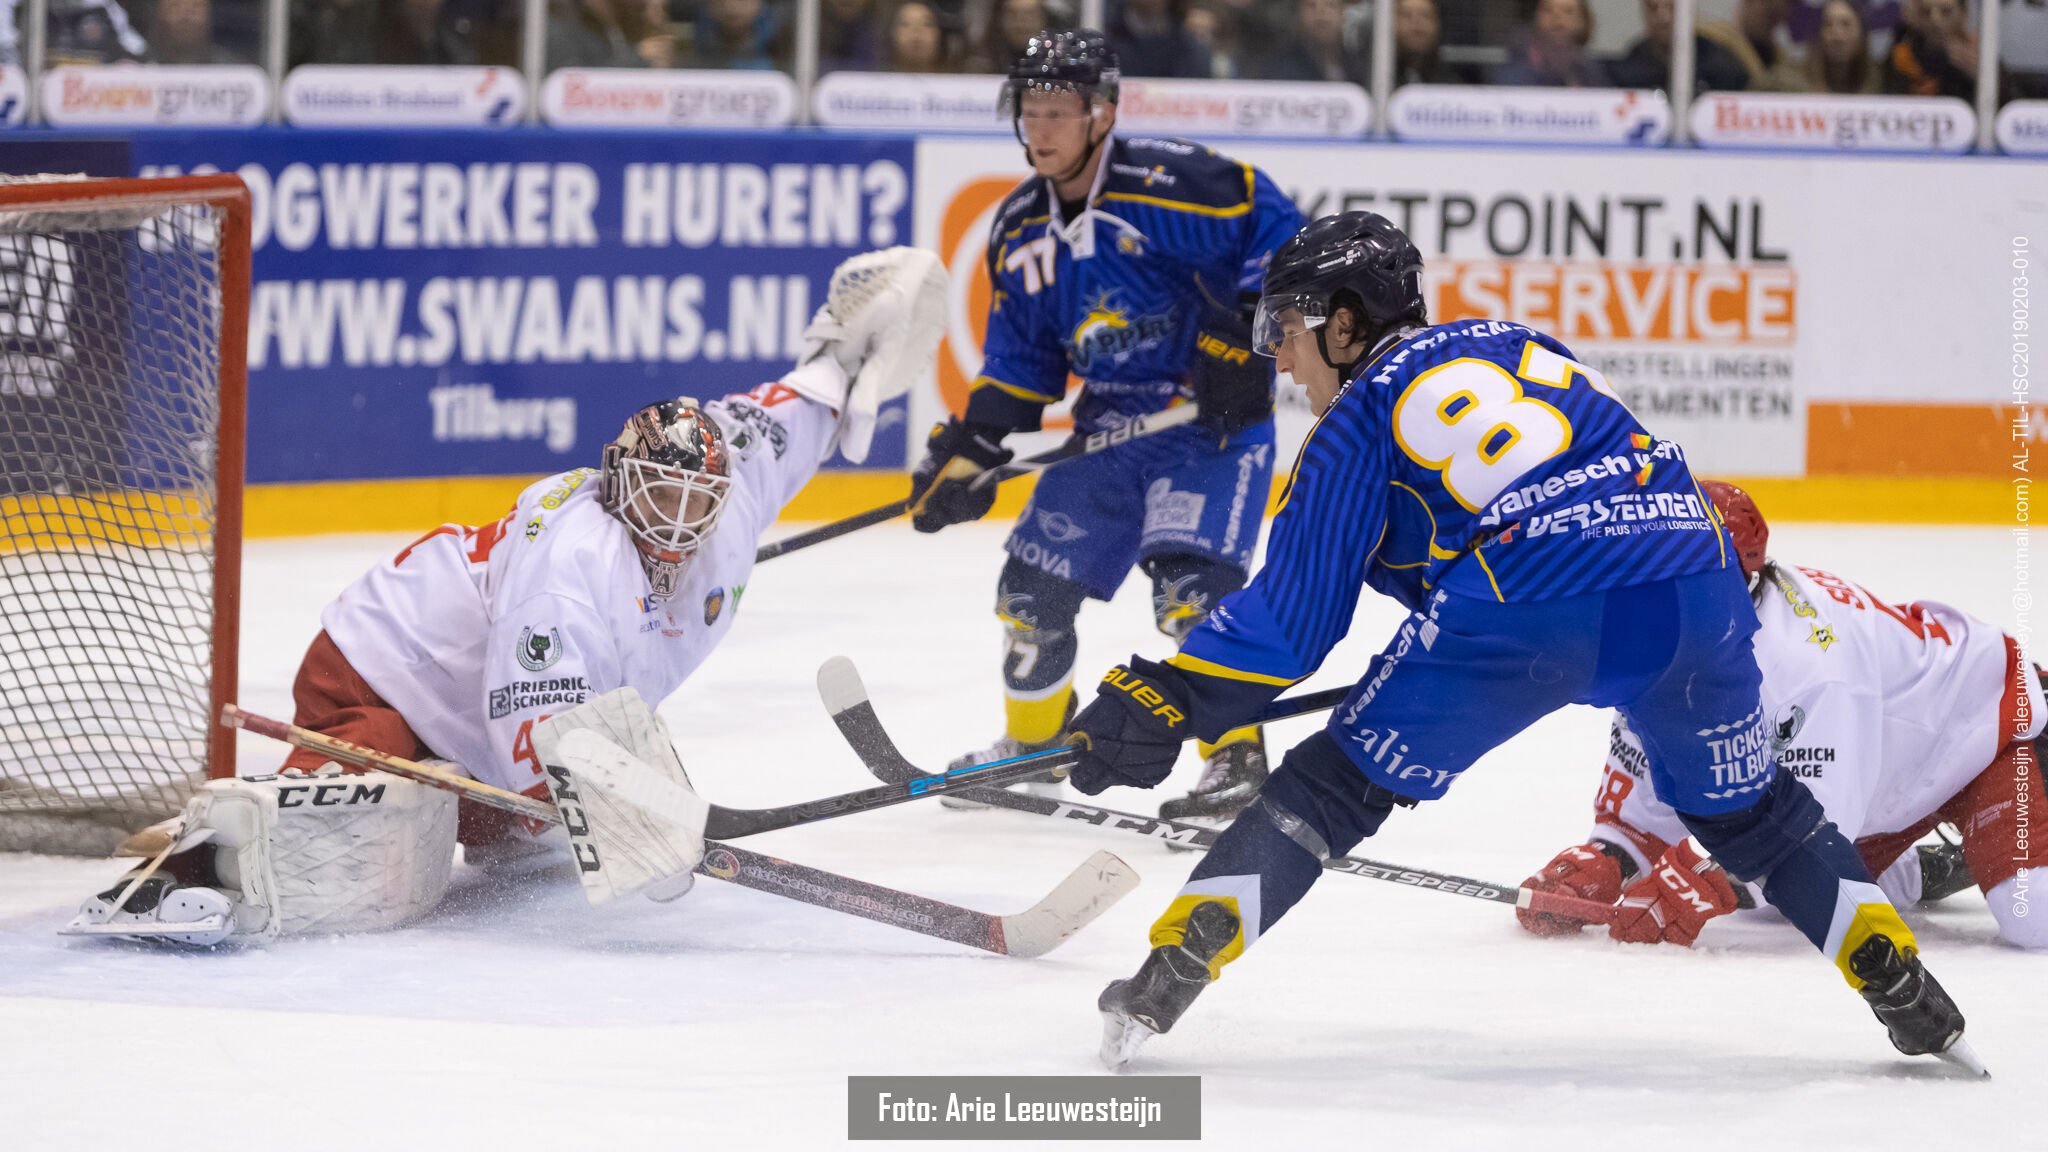 Tilburg Trappers vs. Hannover Scorpions (5-3)